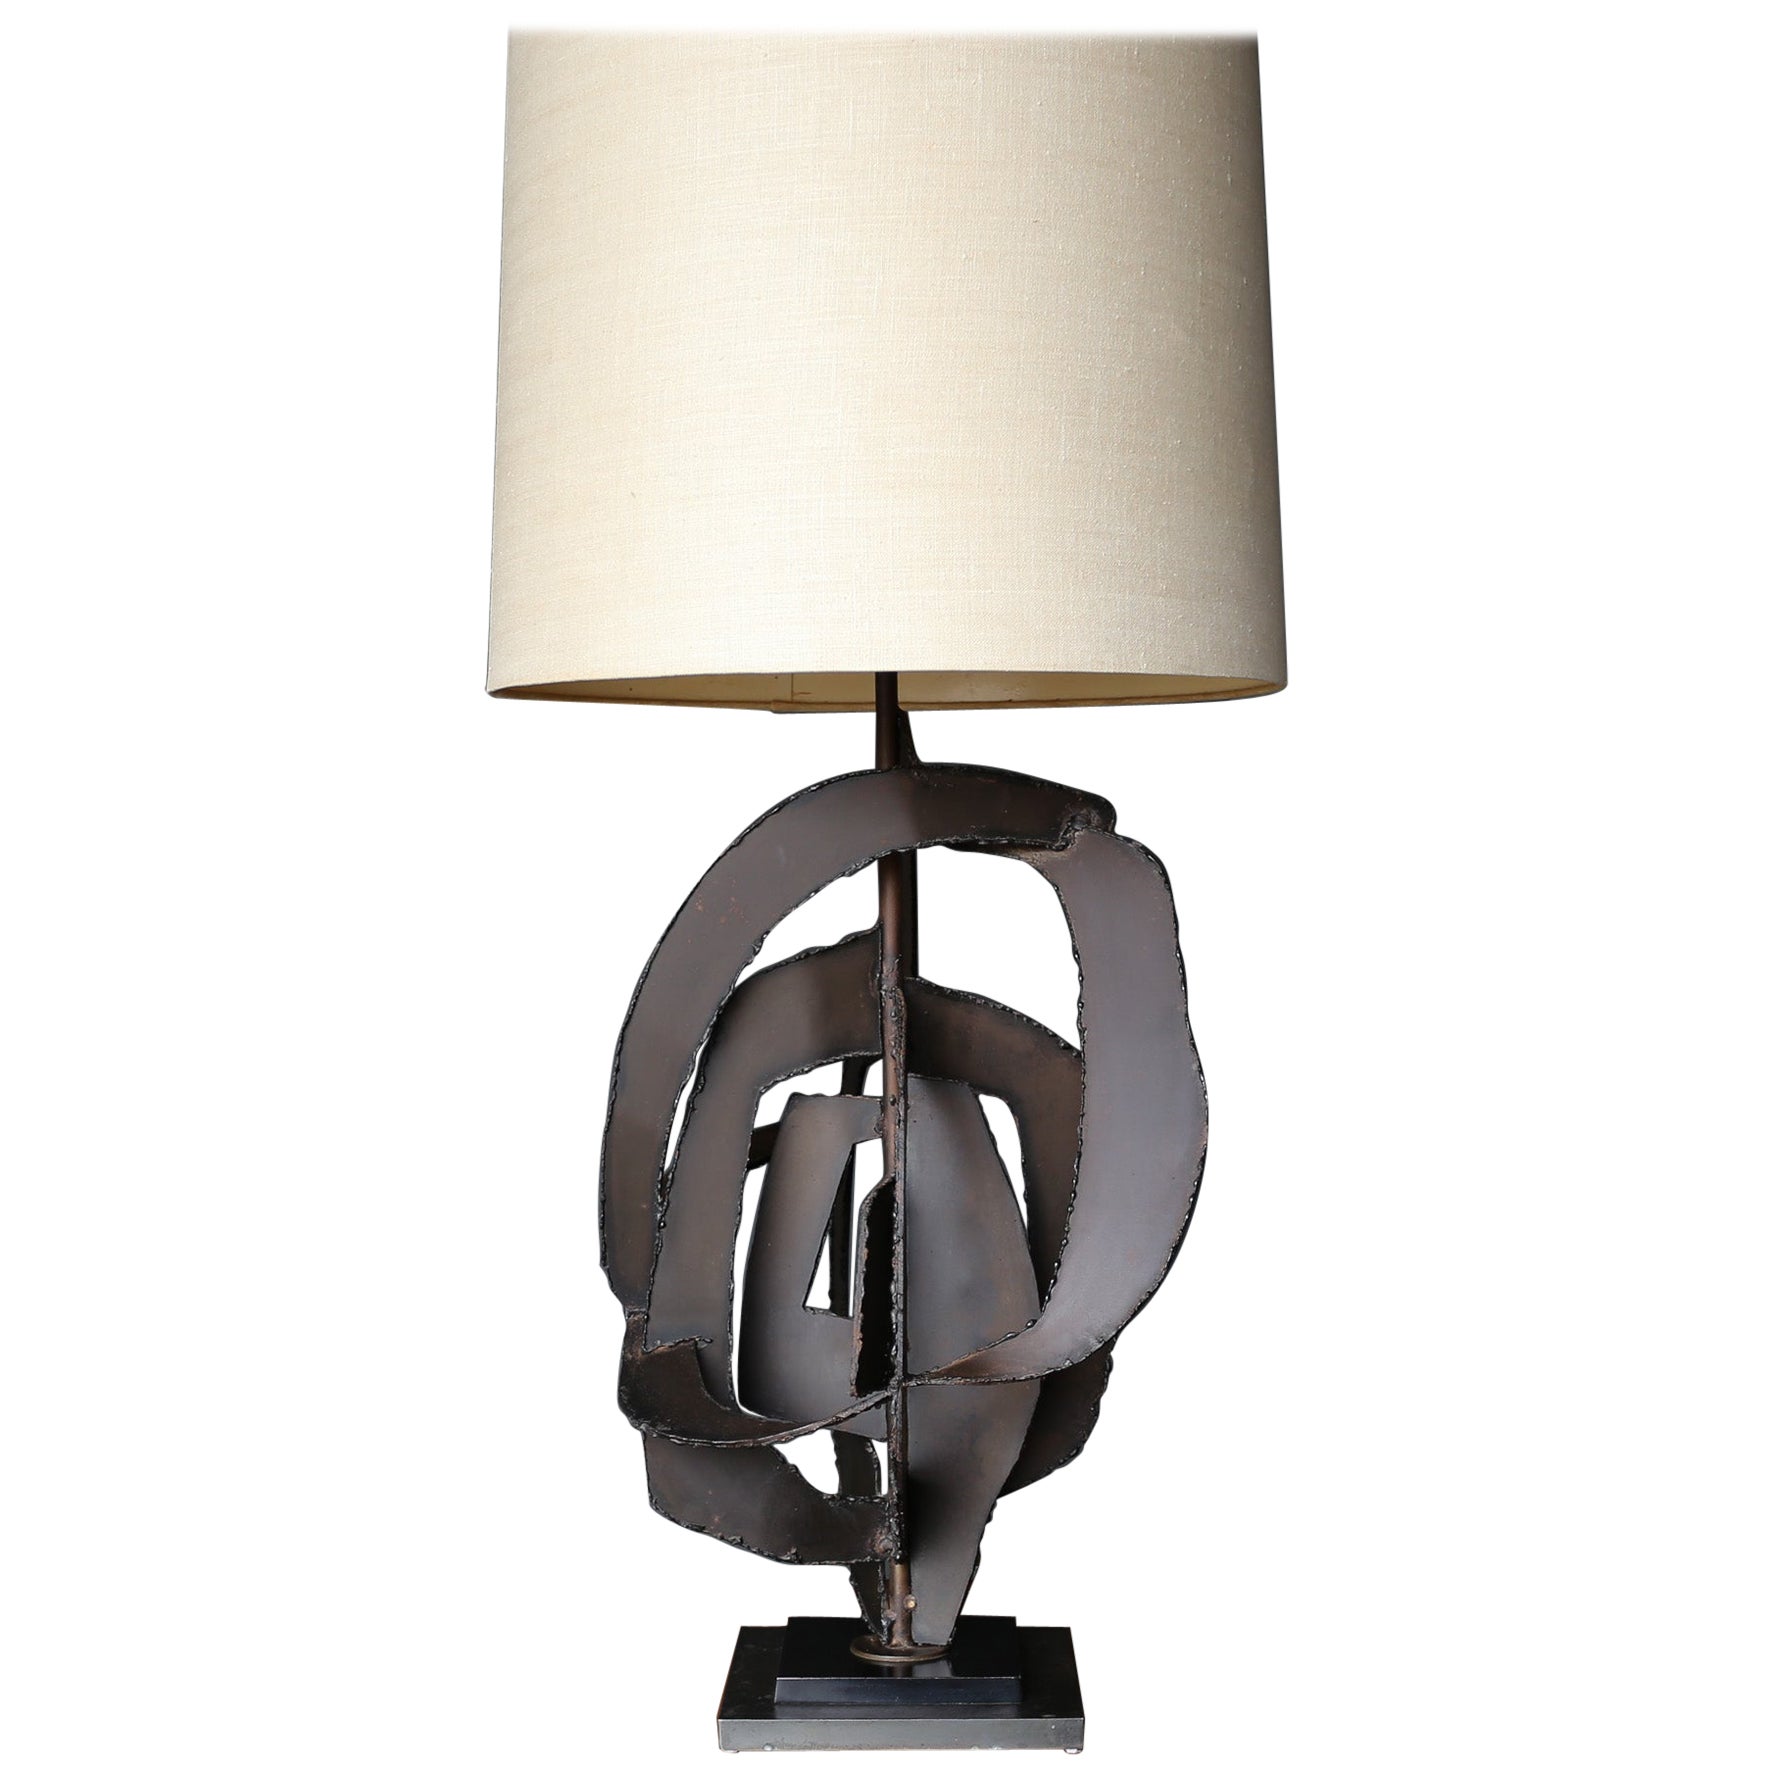 Richard Barr Sculptural Table Lamp for the STUDIO Collection by Laurel, c.1965 For Sale